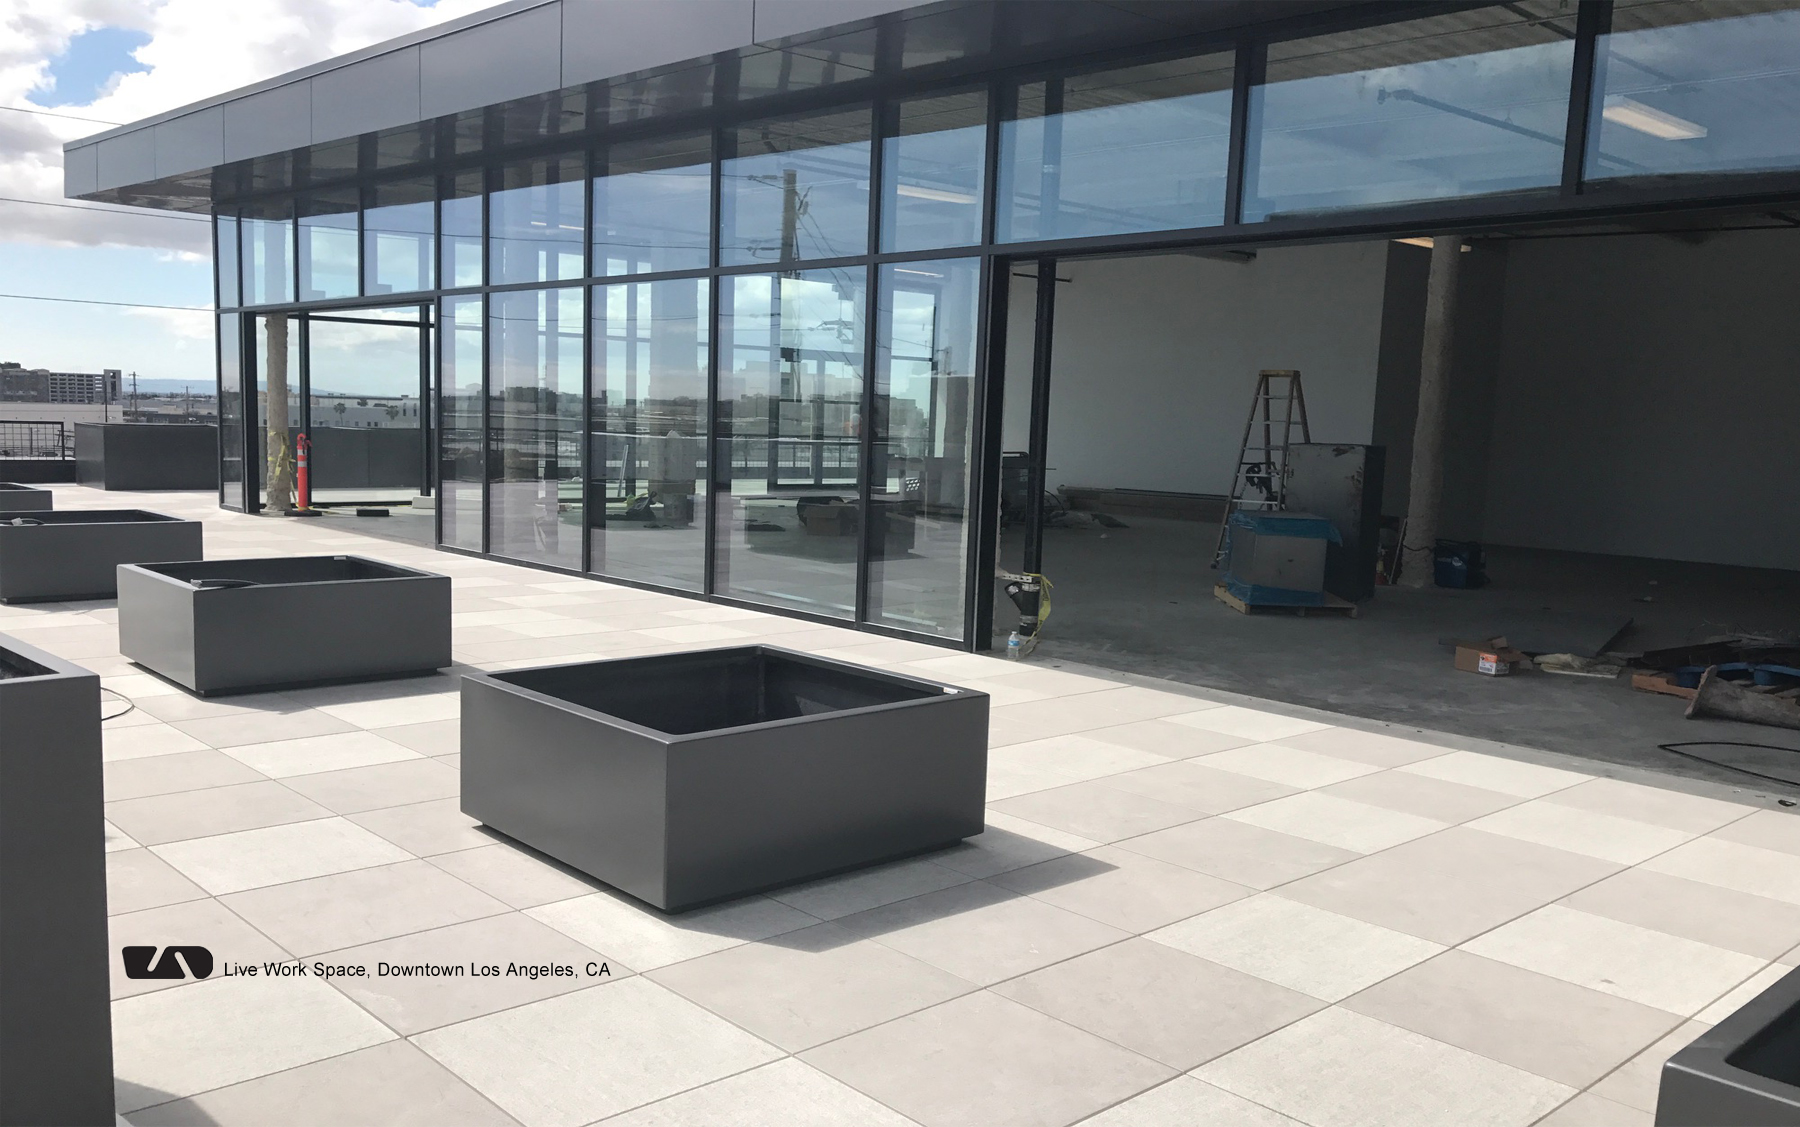 <h1 class="text-white">Pedestal and pavers with lightweight planters make a roof deck functional</h1>